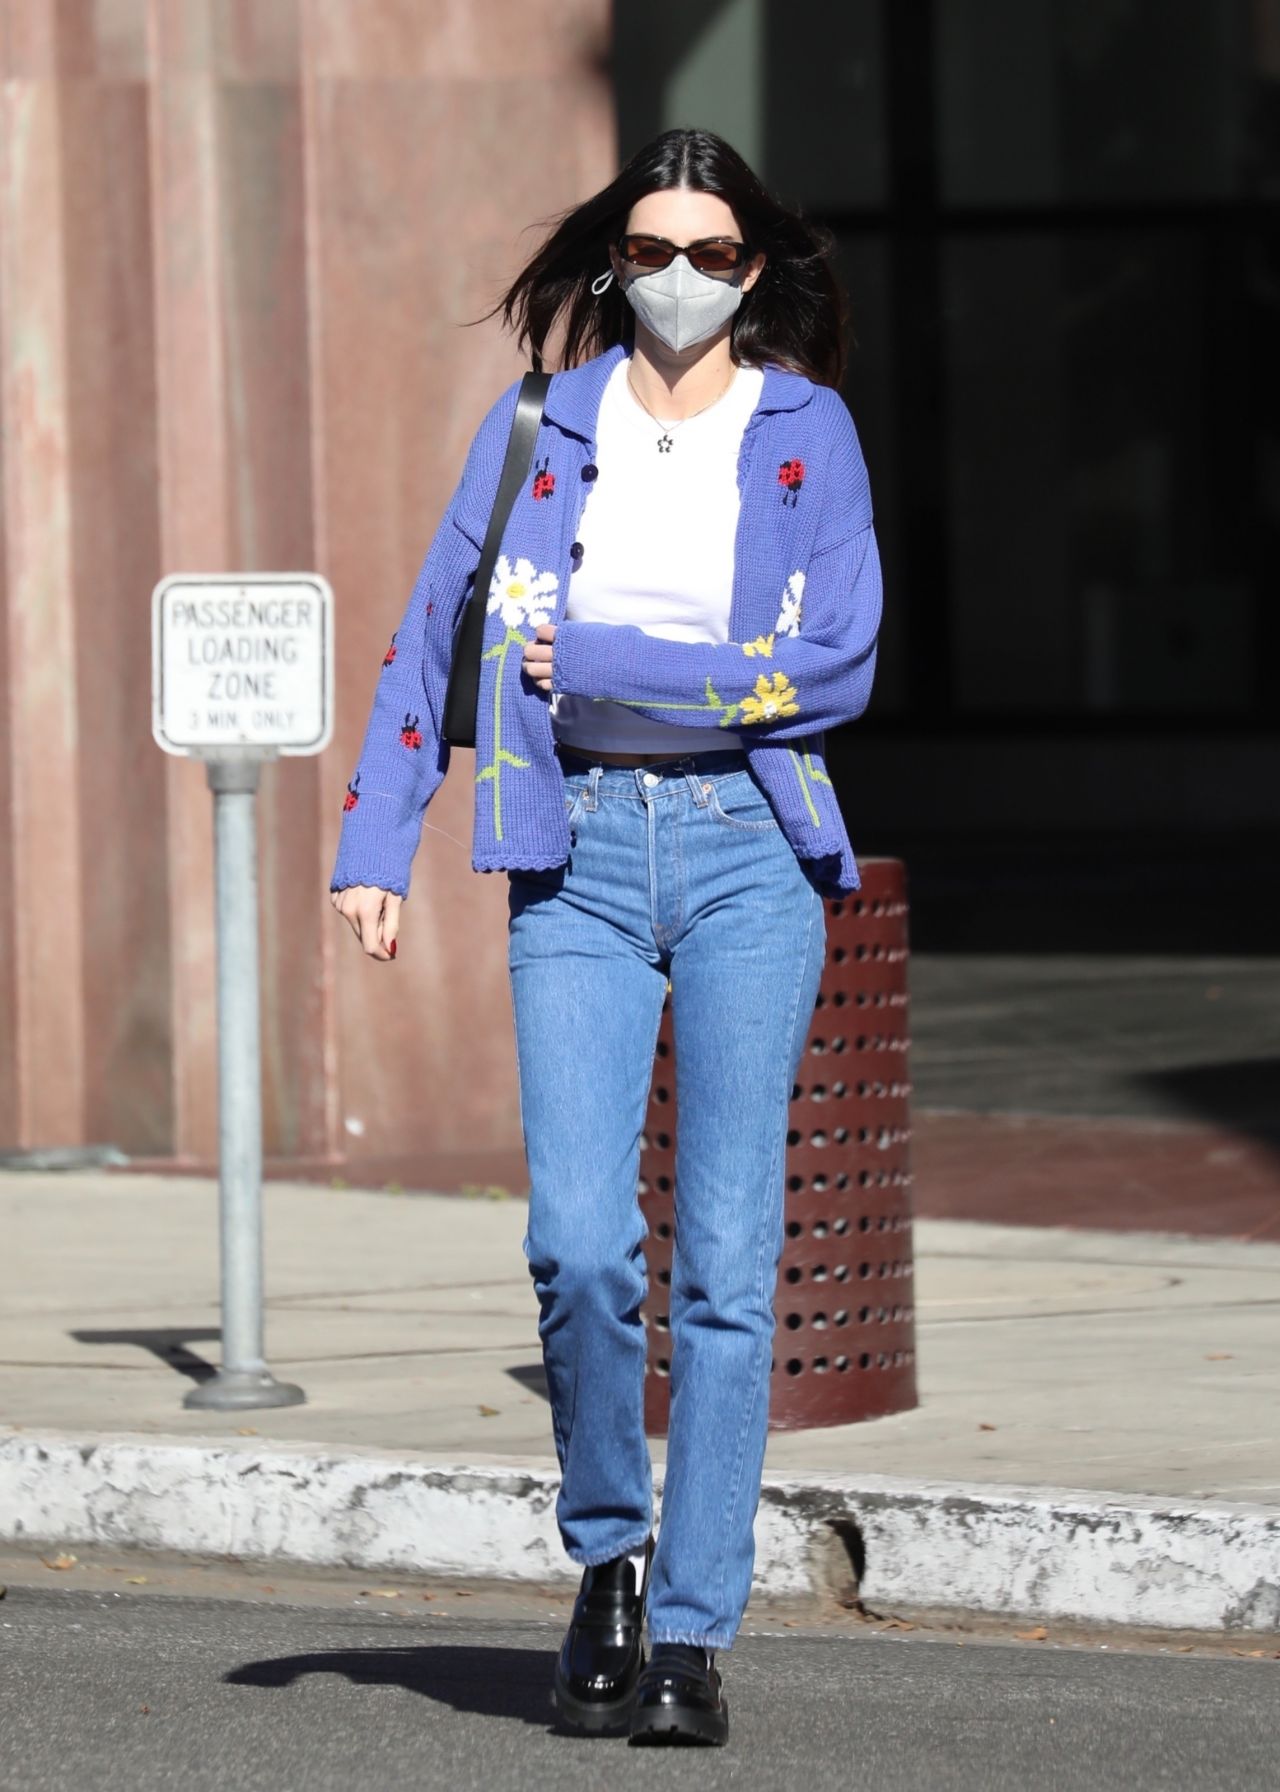 Kendall Jenner Los Angeles December 8, 2017 – Star Style